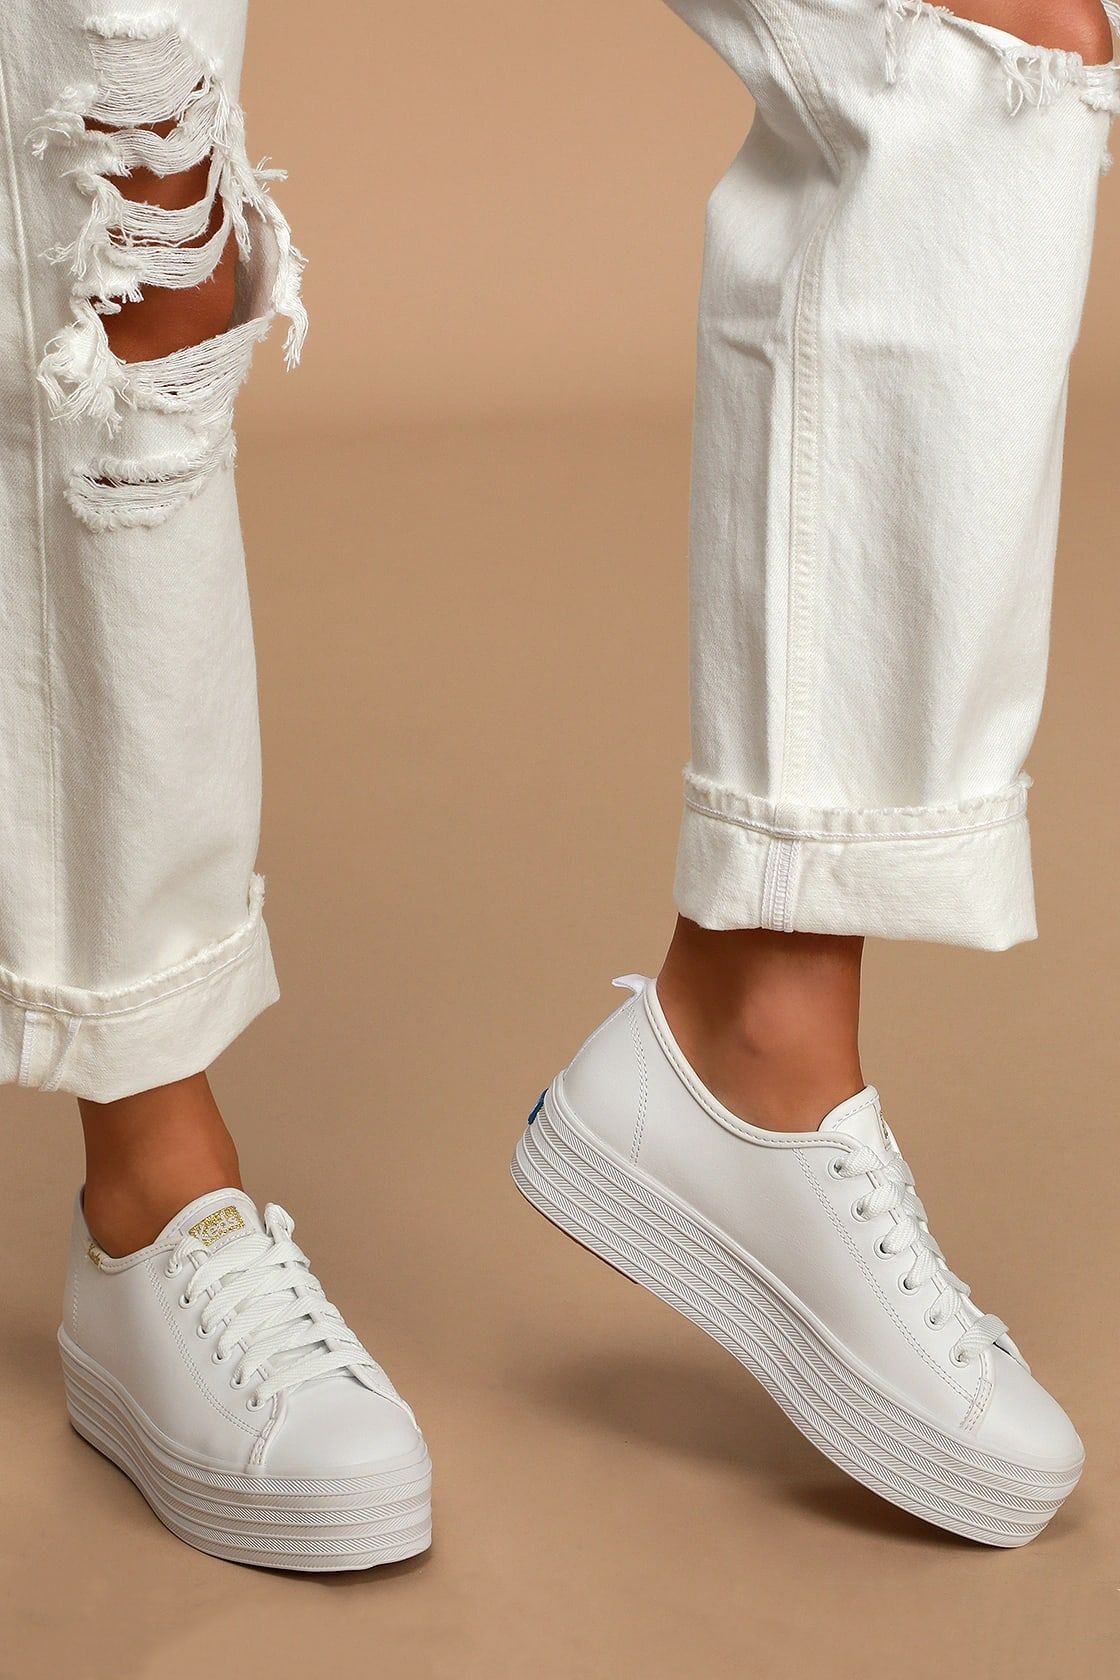 Triple Up White Leather Platform Sneakers | Lulus